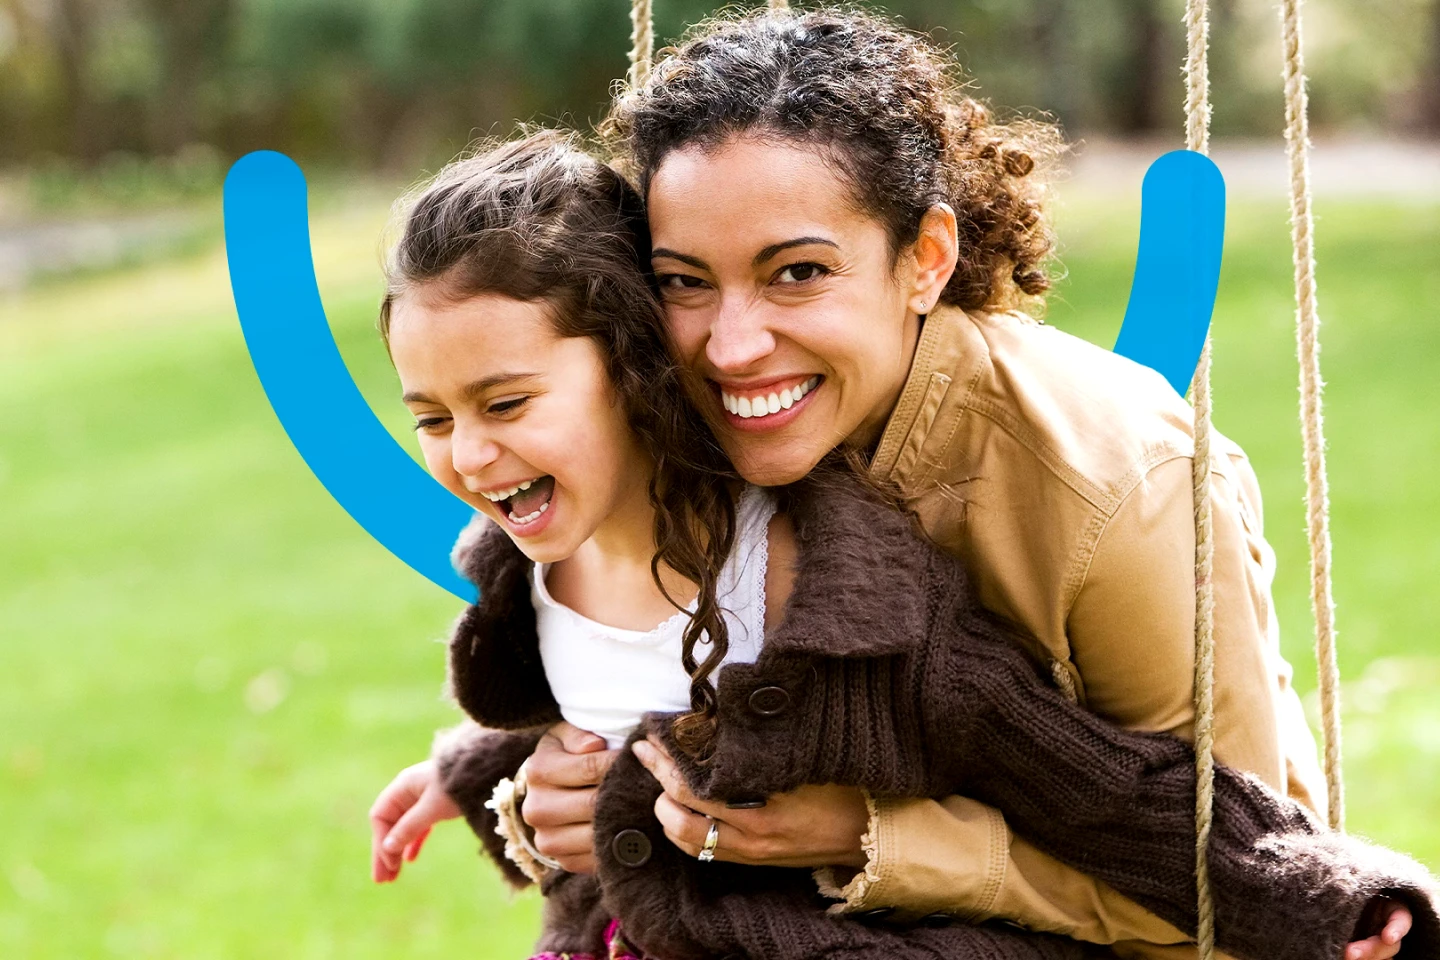 A mother and her little girl sharing a joyful moment on a swing in a park, showcasing a confident smile with an Aspen Dental smile icon behind them.